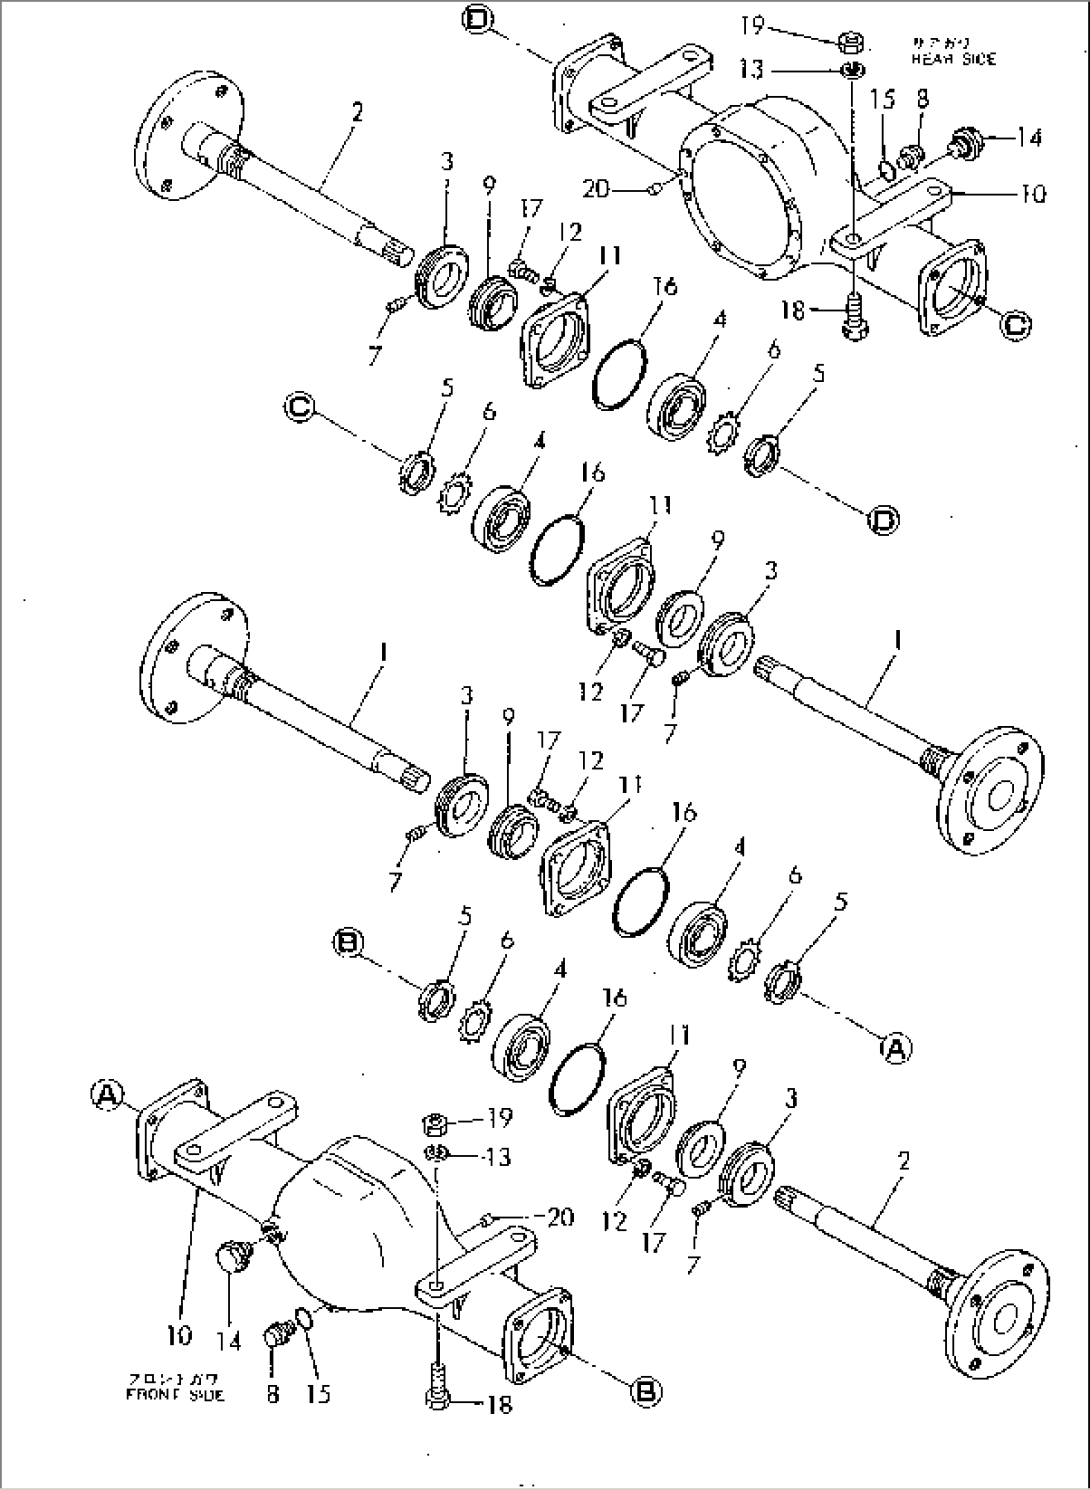 AXLE SHAFT AND AXLE HOUSING